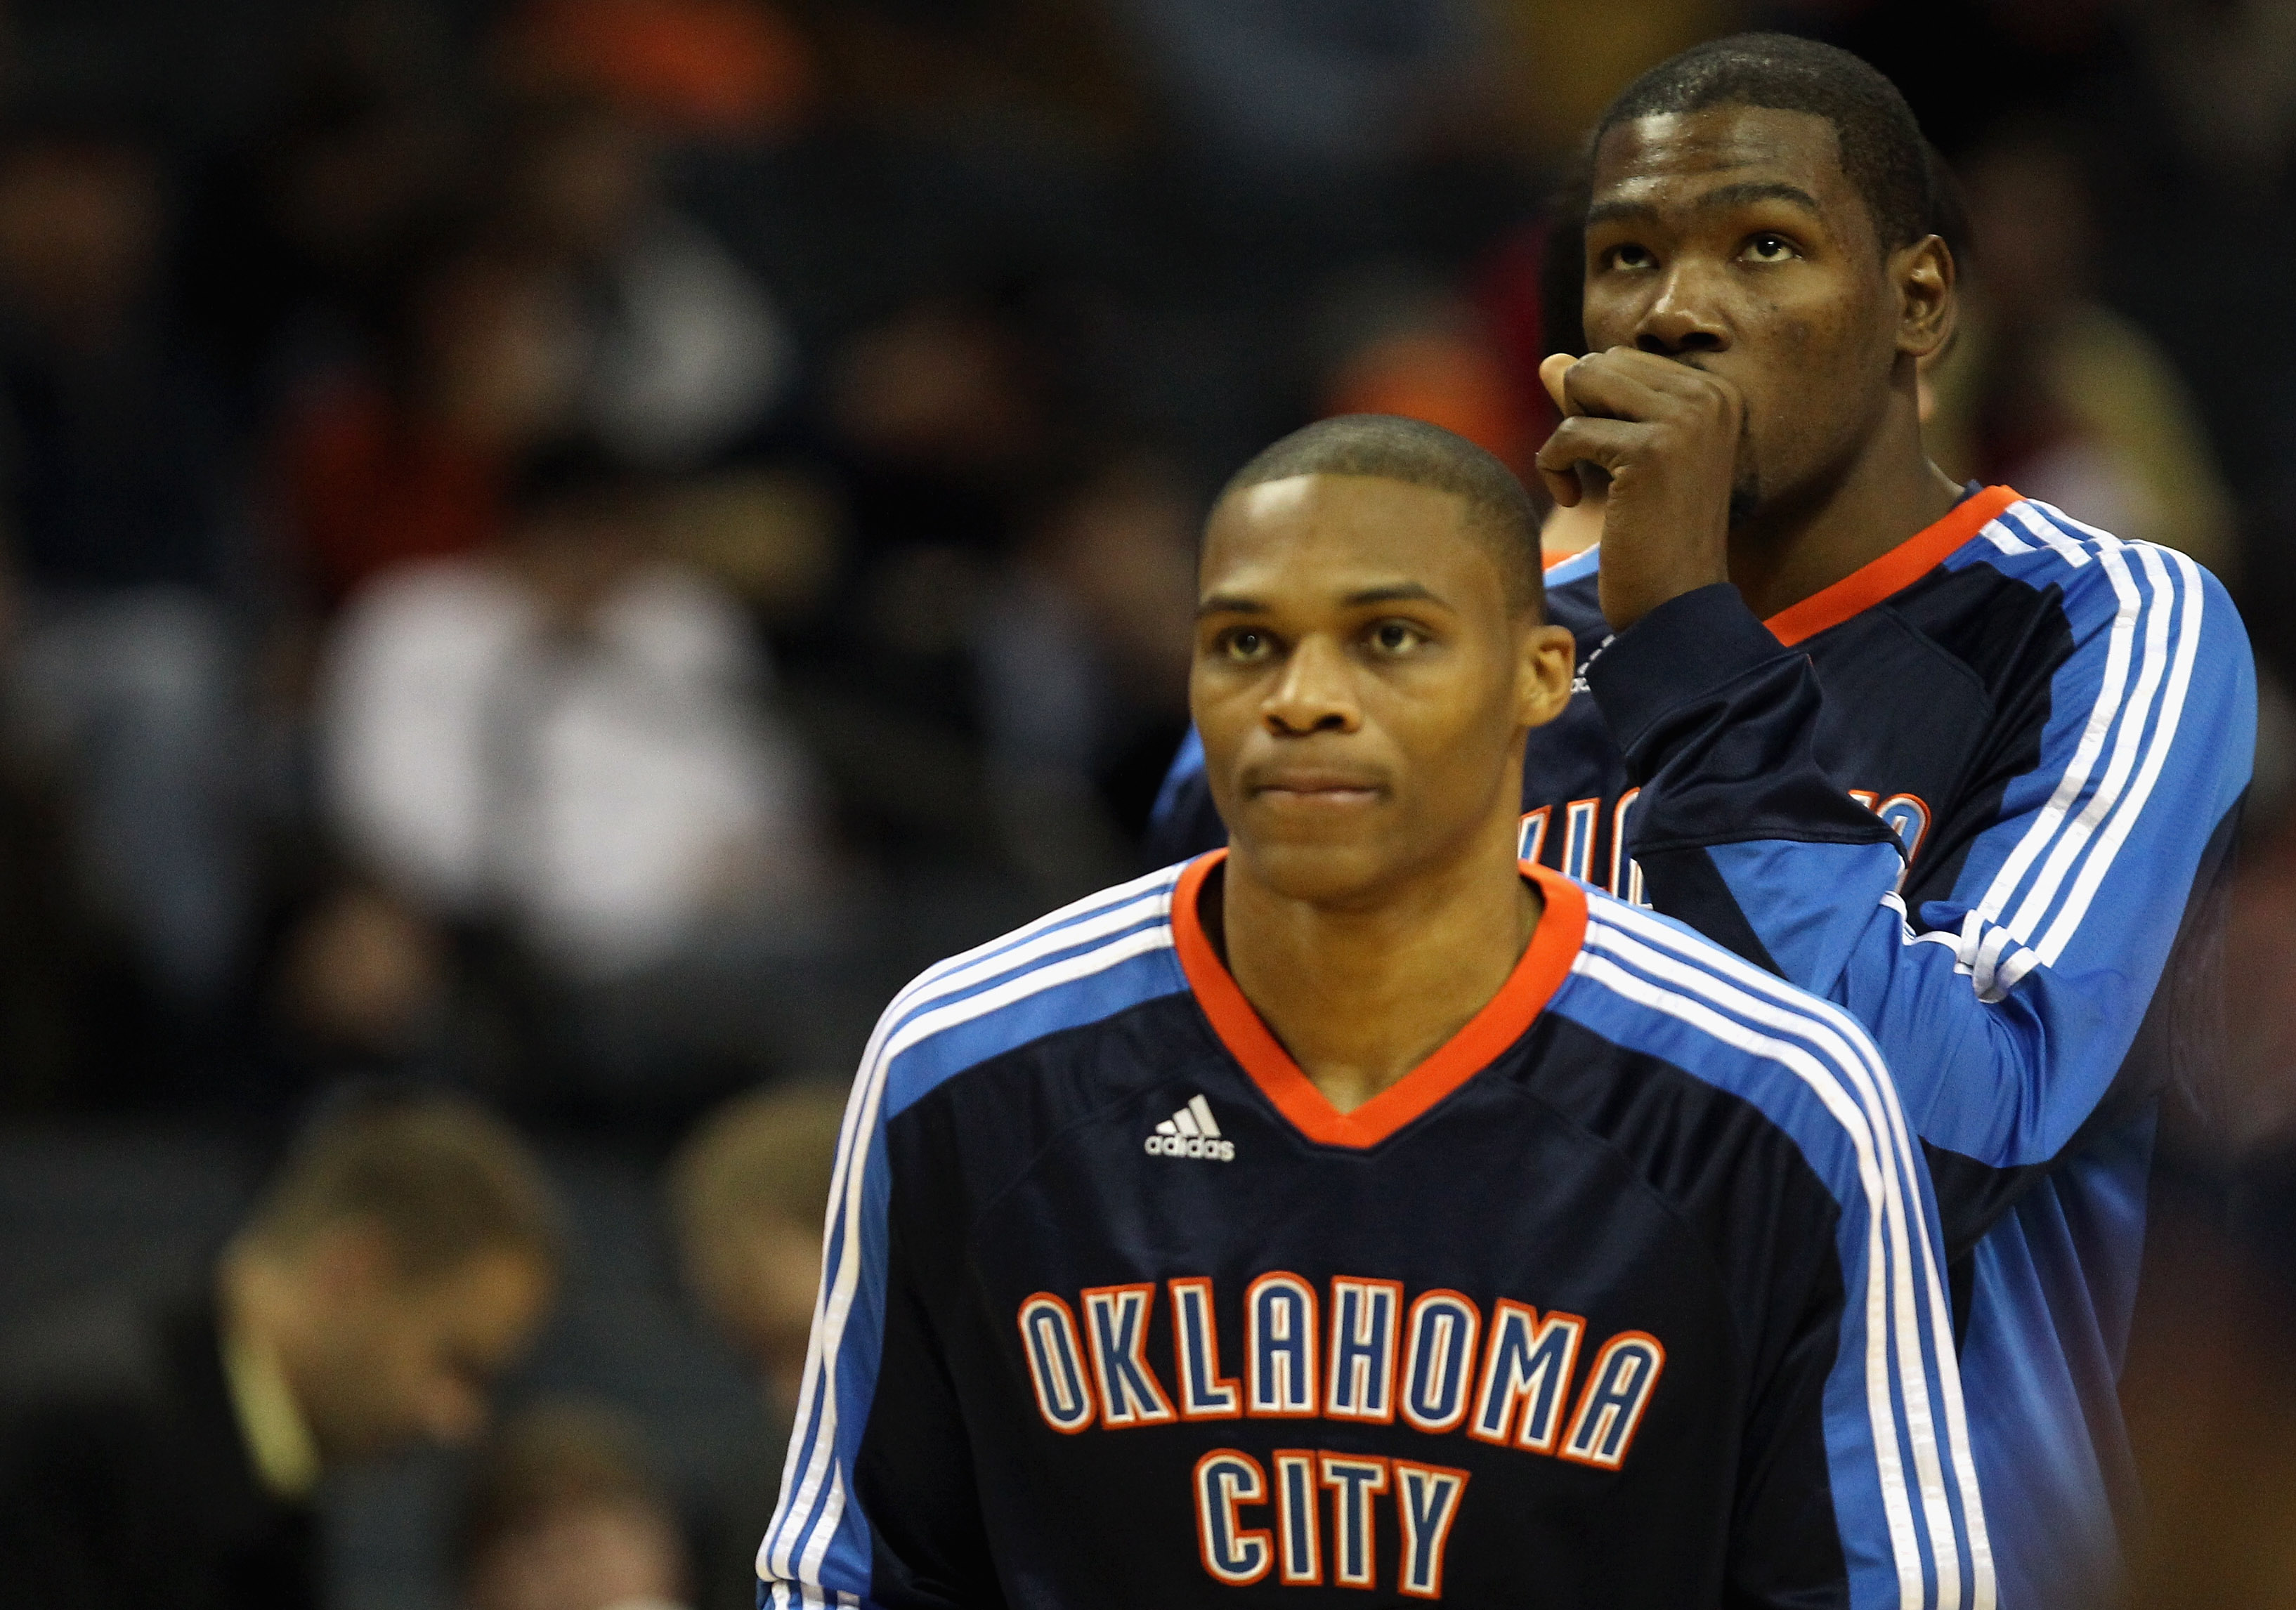 CHARLOTTE, NC - DECEMBER 21:  Teammates Kevin Durant #35 and Russell Westbrook #0 of the Oklahoma Thunder warmup before the start of their game against the Charlotte Bobcats at Time Warner Cable Arena on December 21, 2010 in Charlotte, North Carolina. NOT